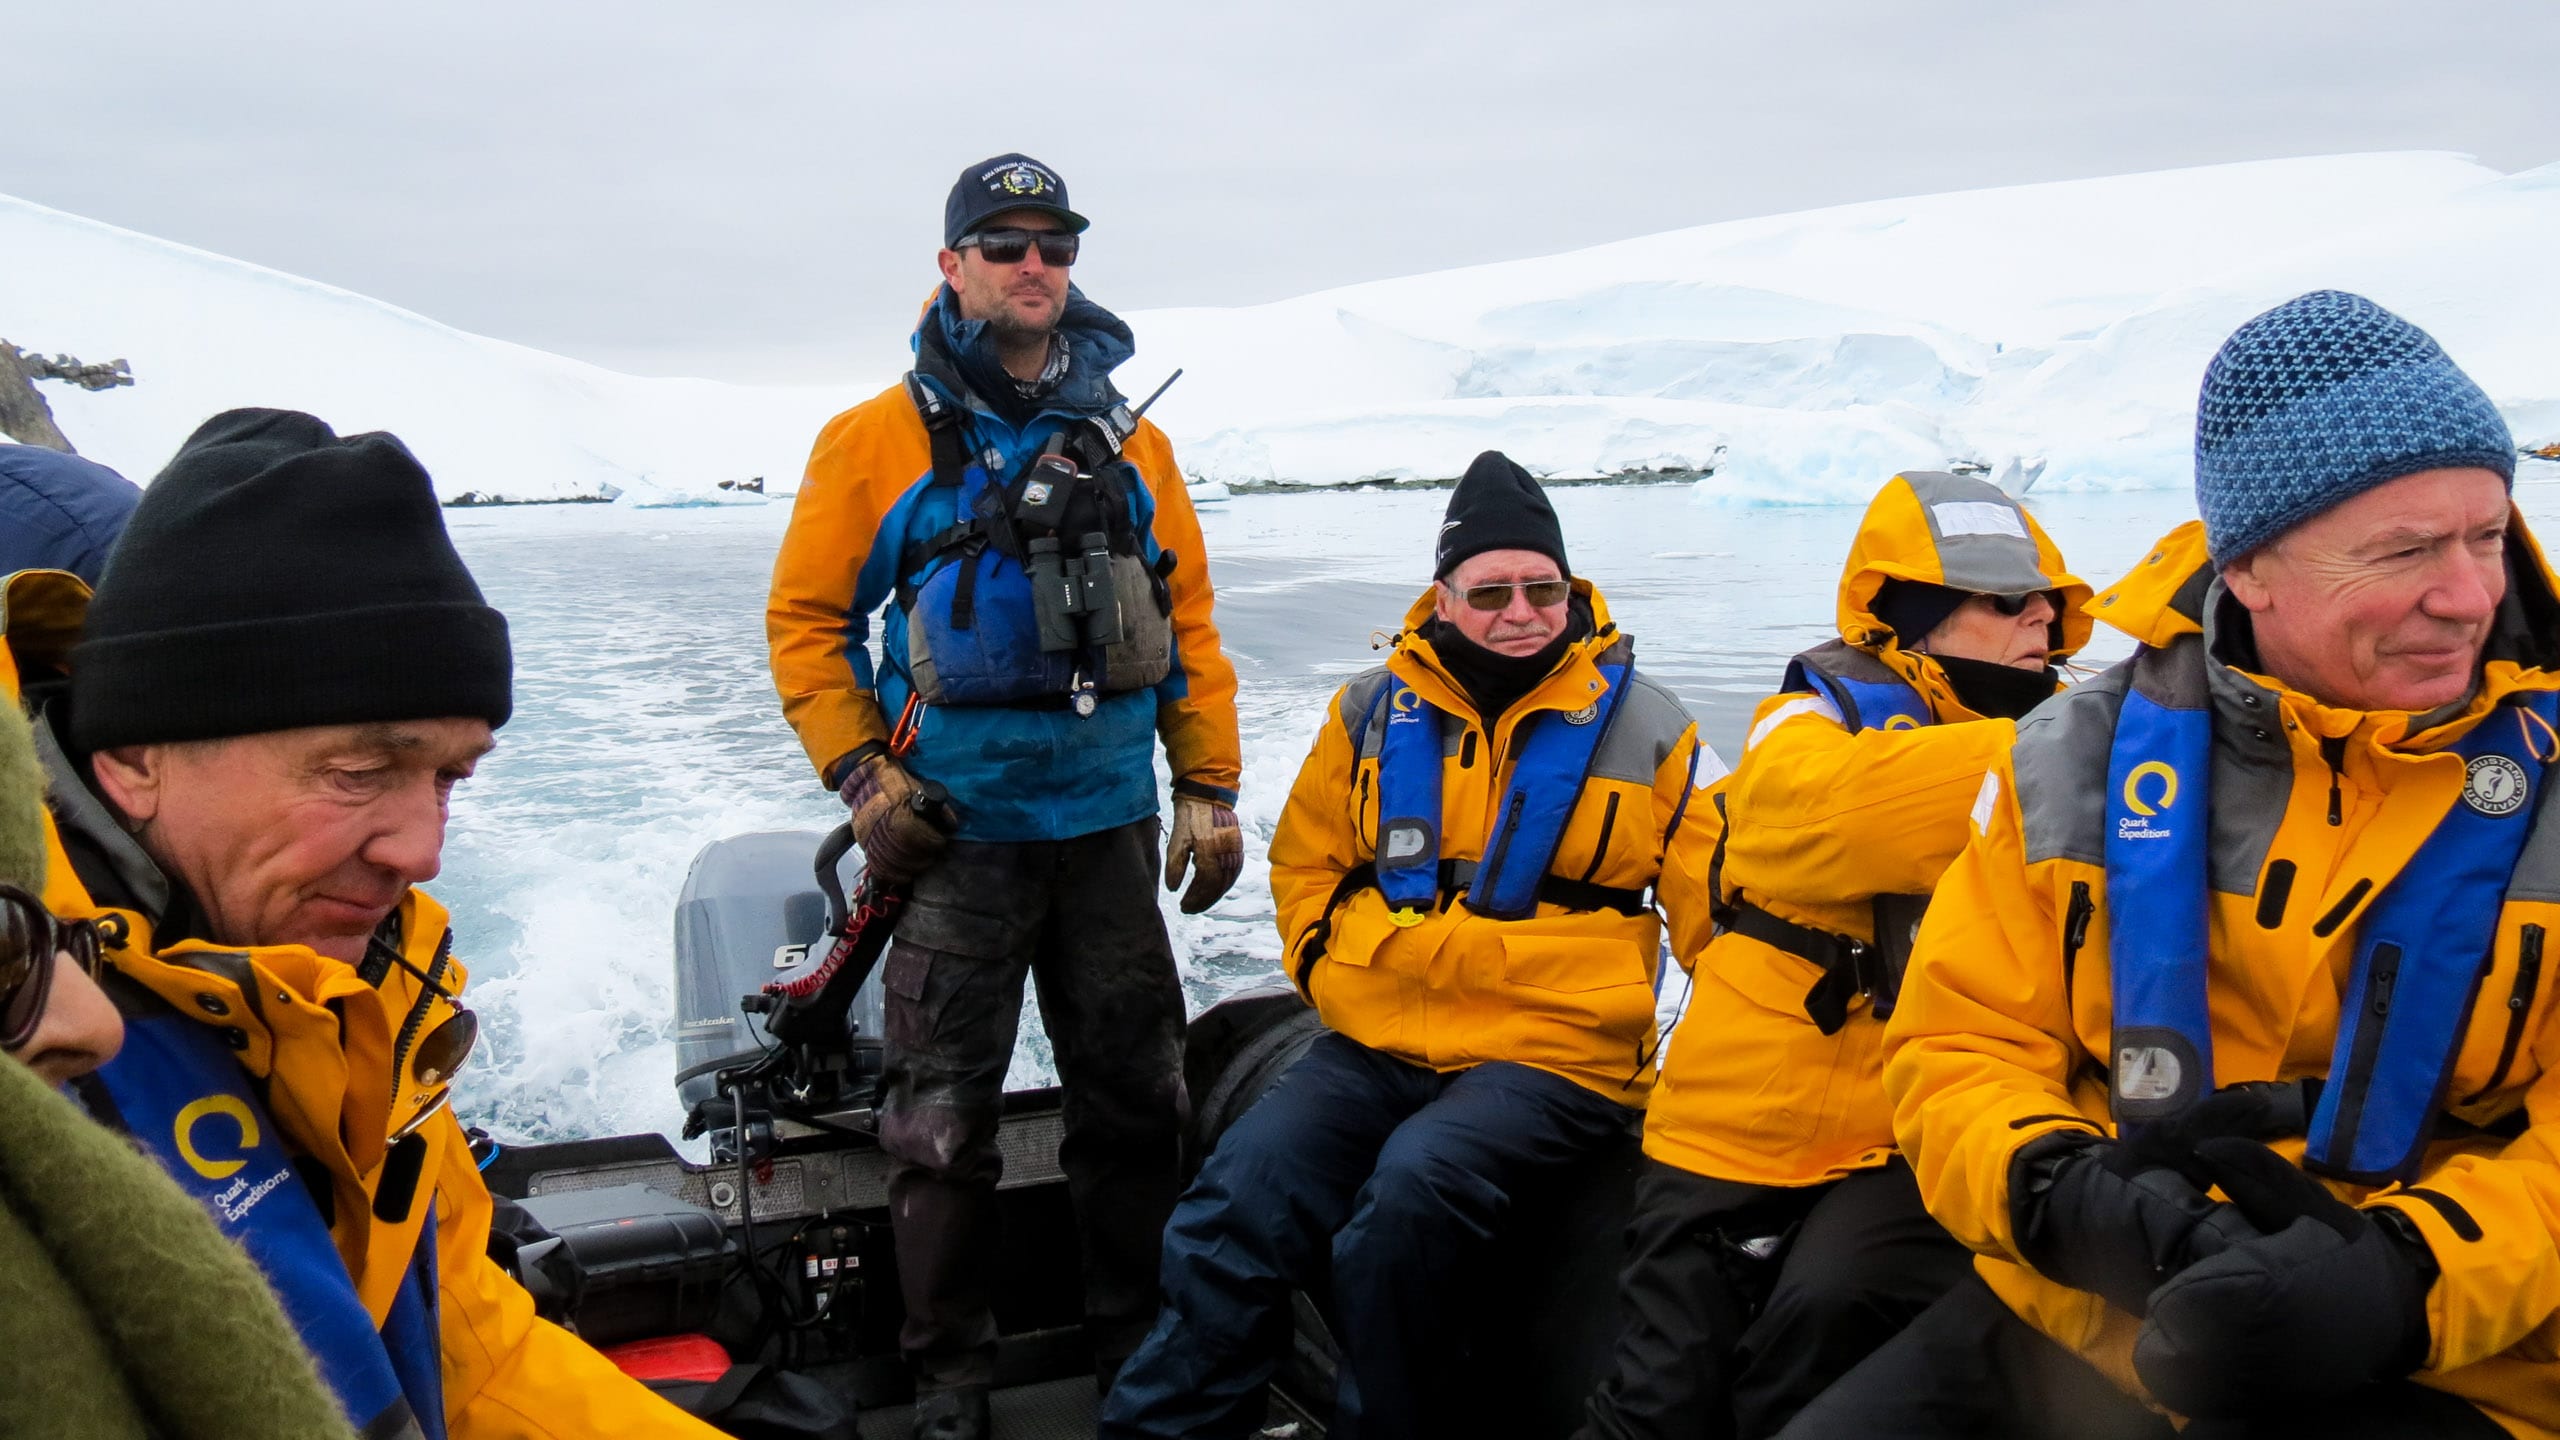 Group of travelers rides boat in Antarctica